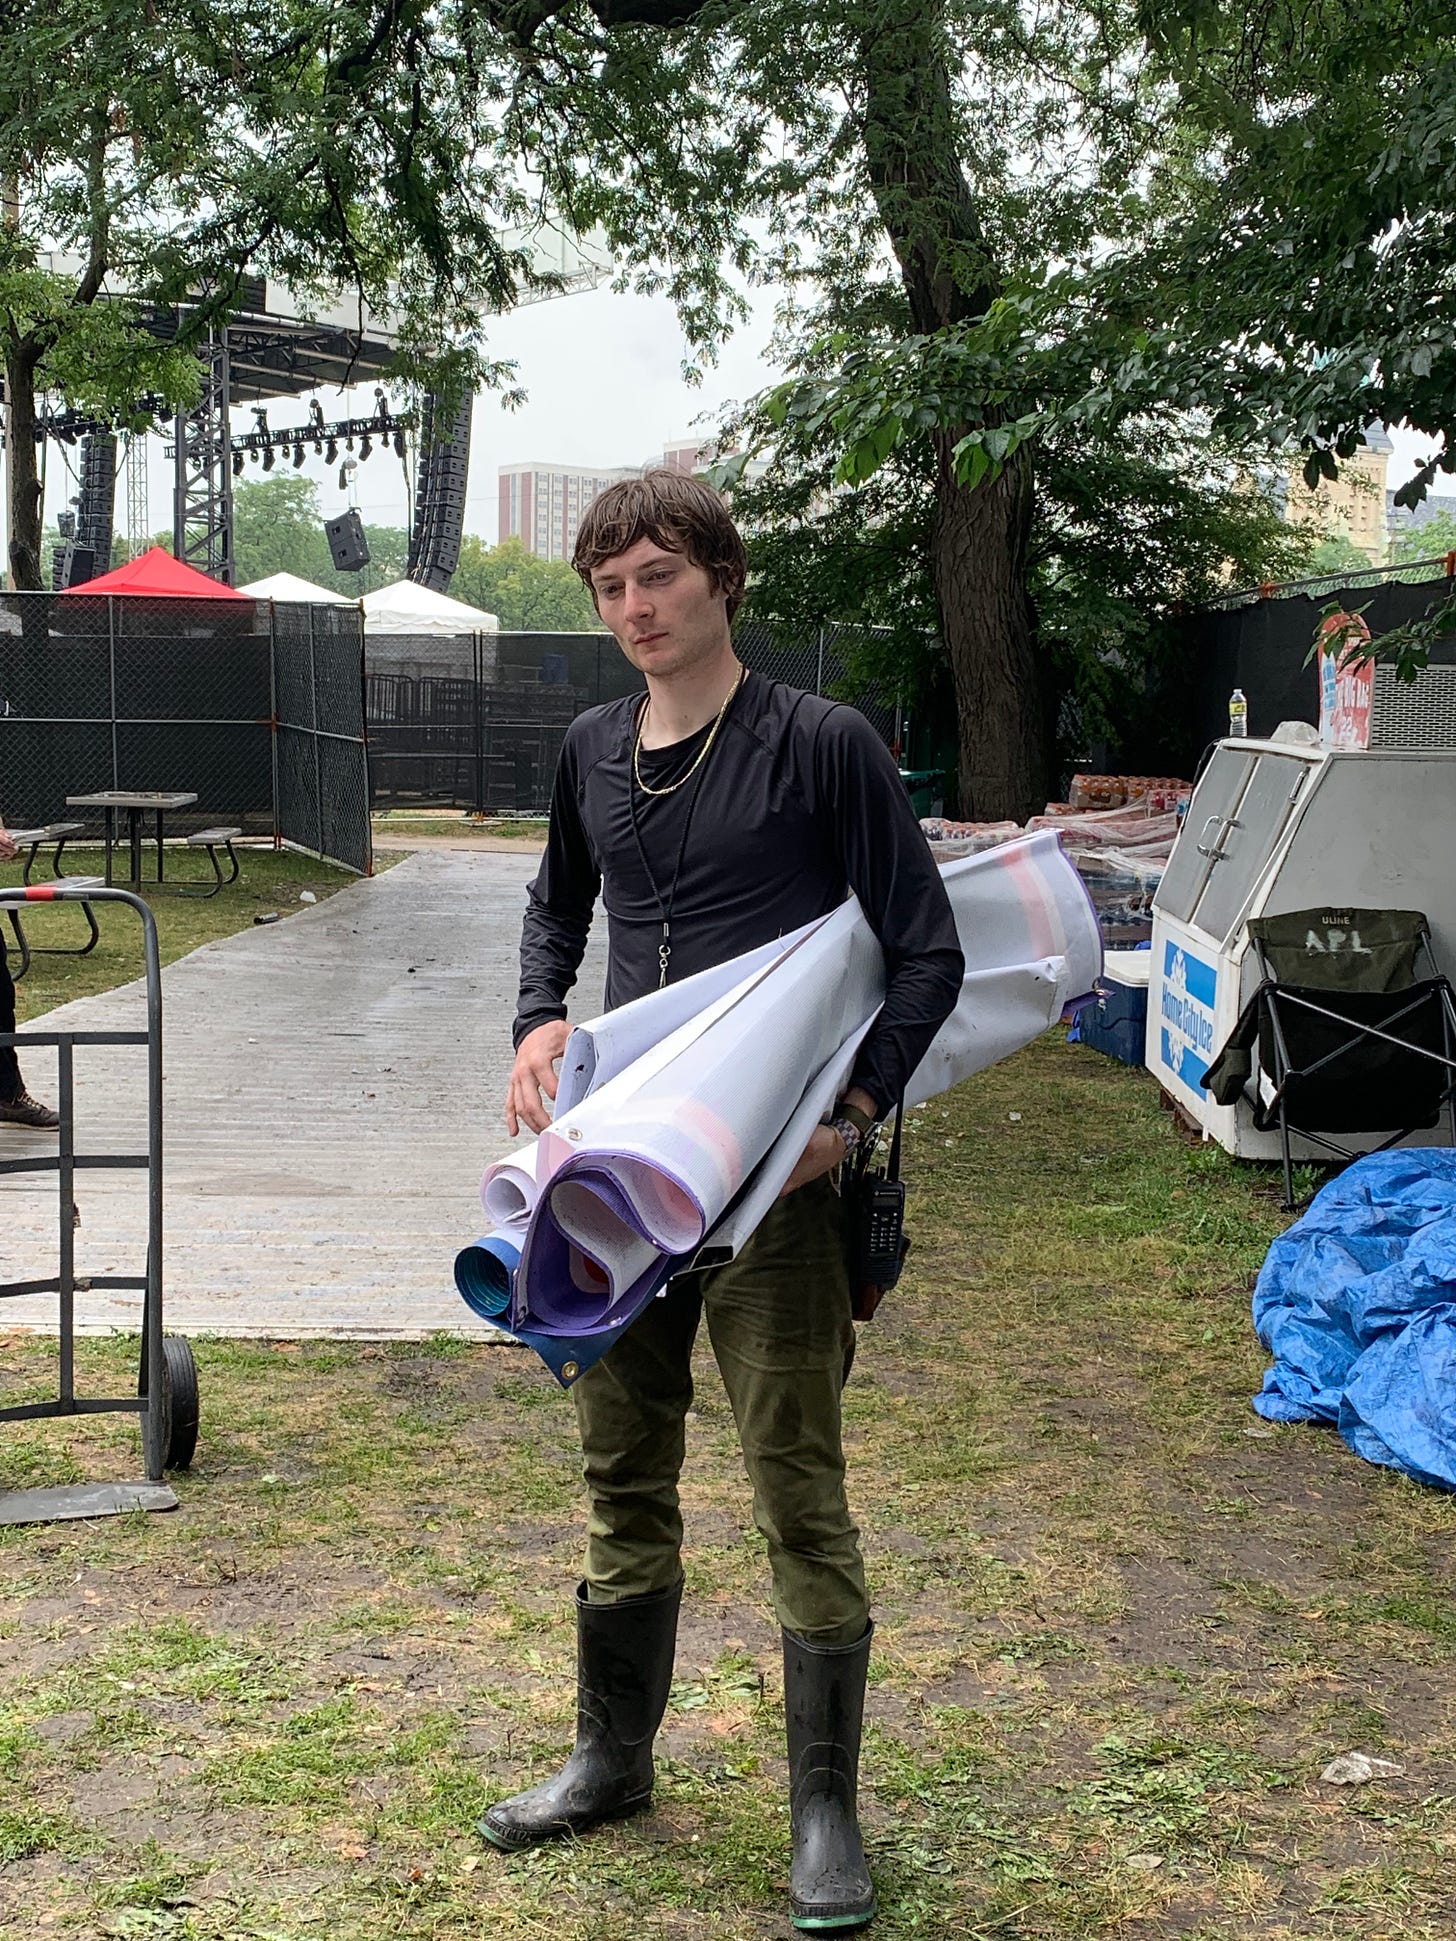 A photo of me, wet from rain, holding sponsor banners at Pitchfork Music Festival.